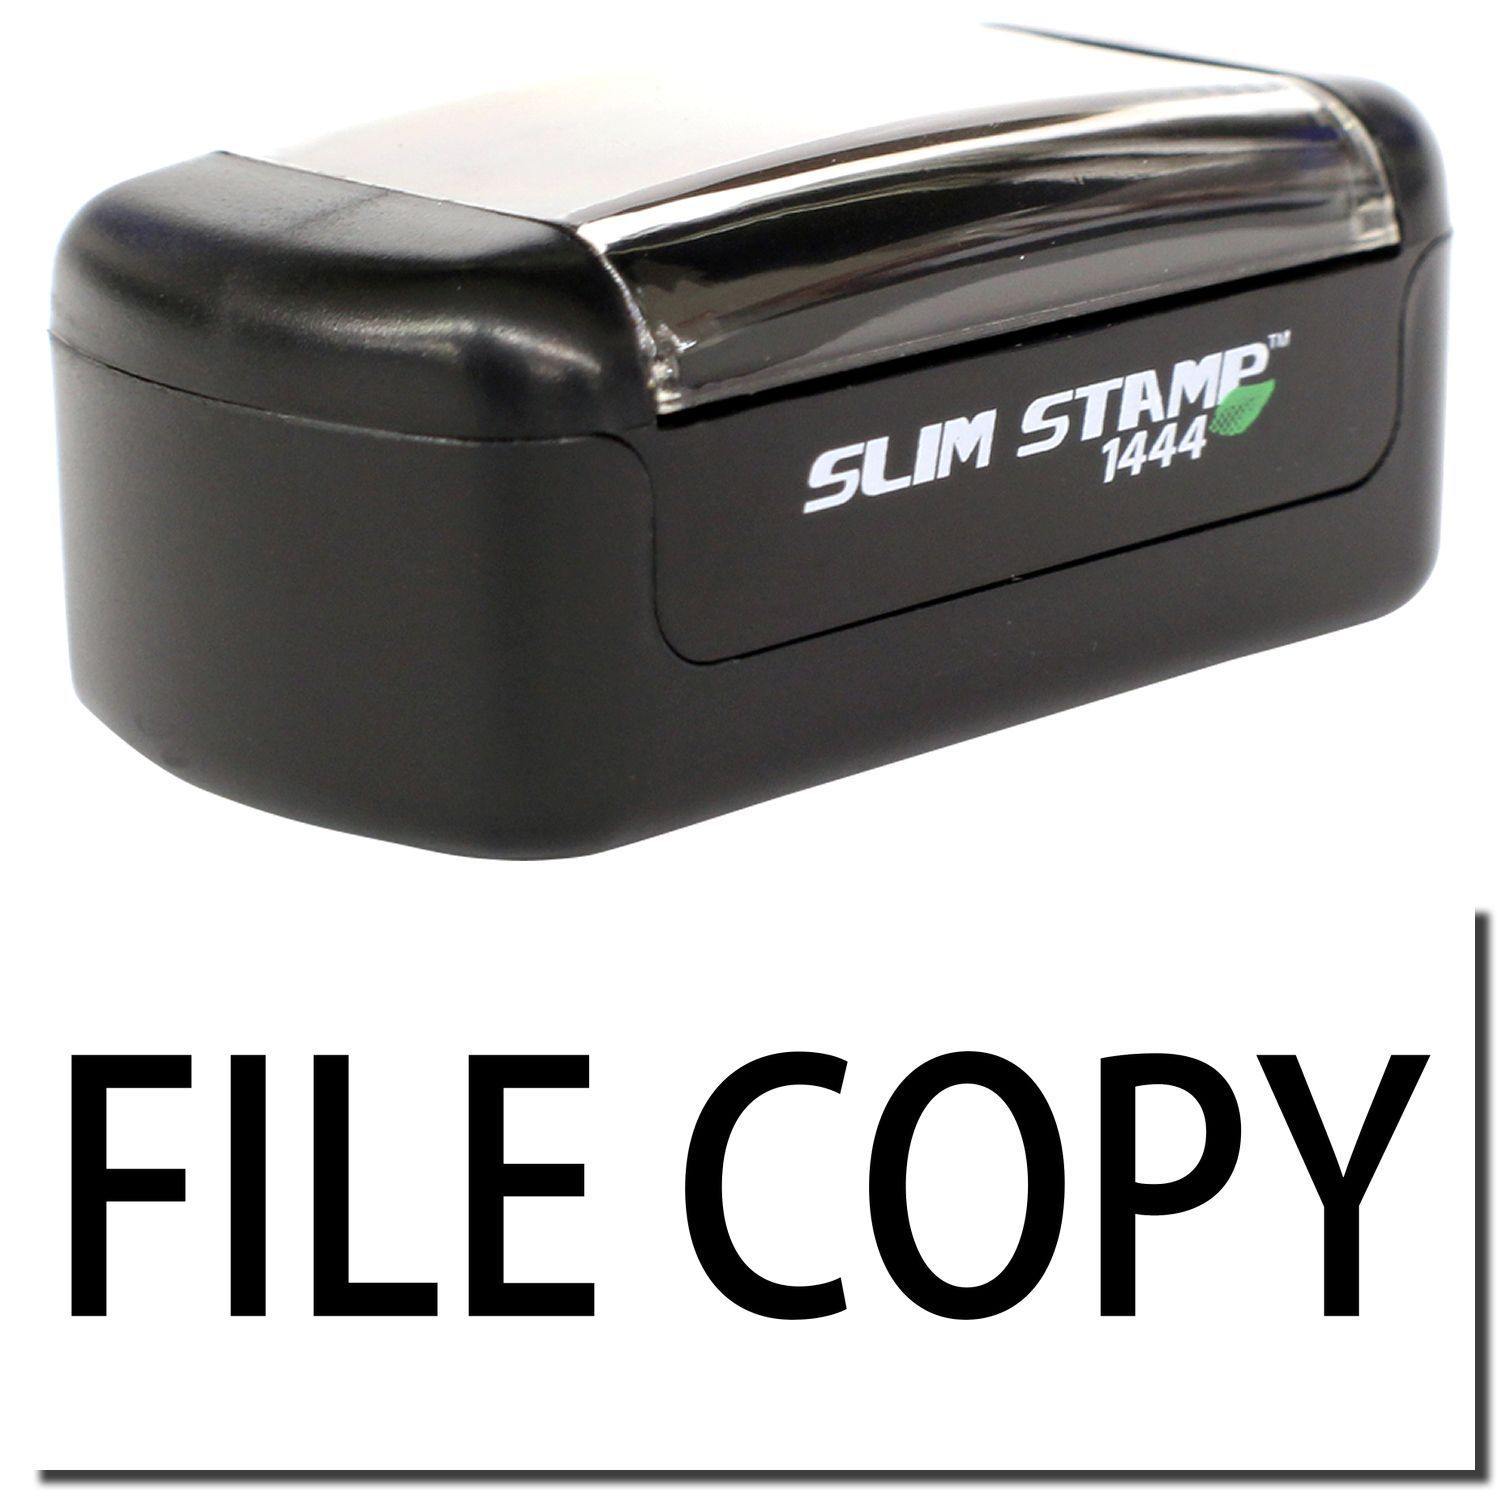 A stock office pre-inked stamp with a stamped image showing how the text "FILE COPY" is displayed after stamping.